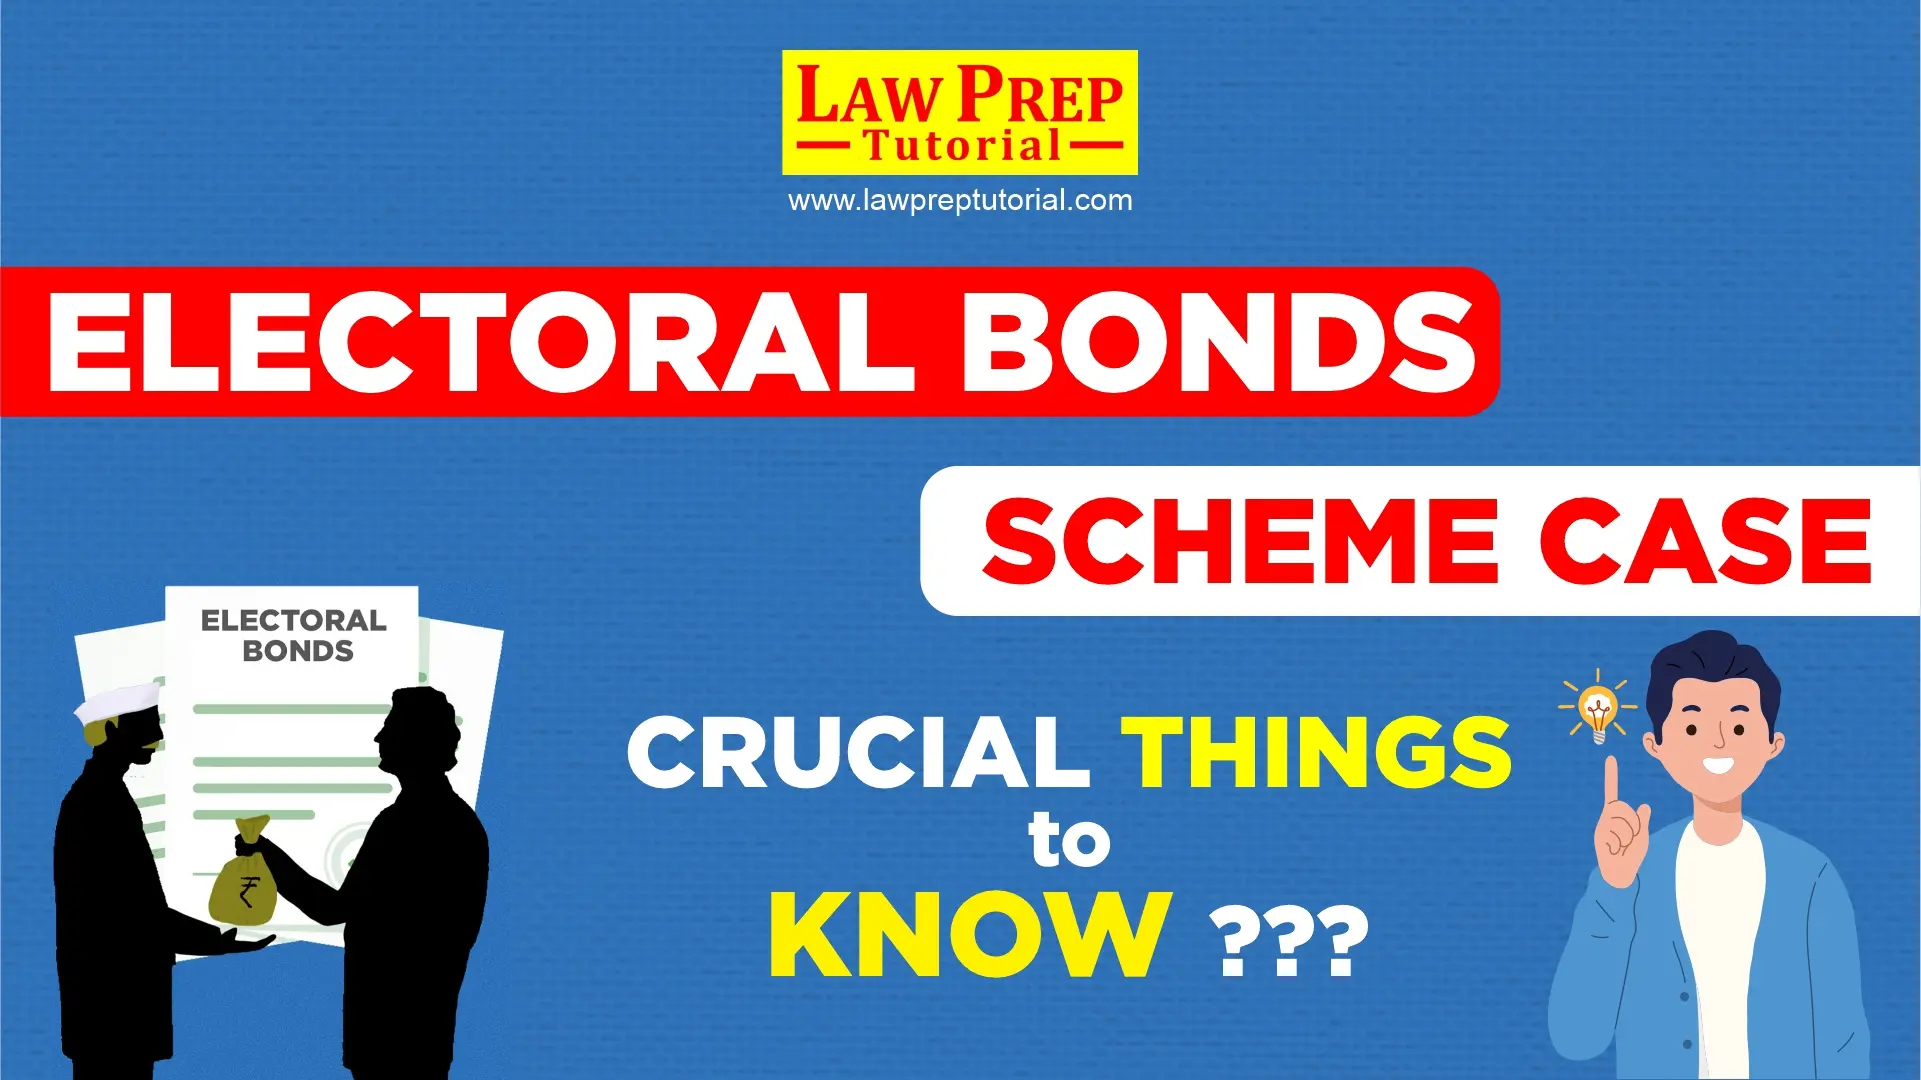 Electoral Bonds Scheme Case (Crucial Things to Know)